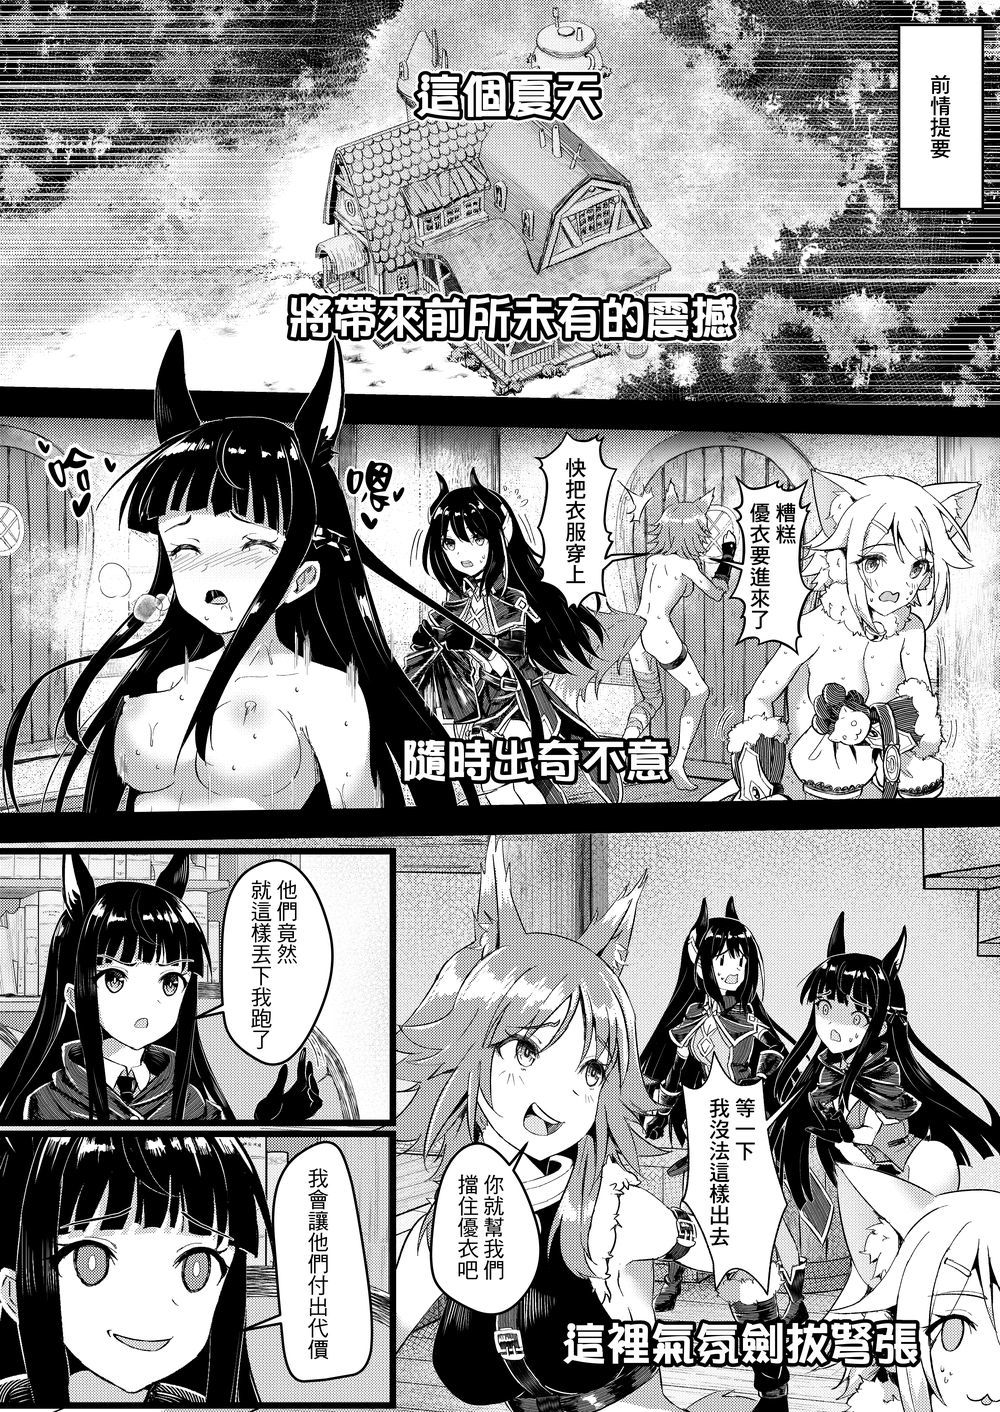 (FF38) [Hachinosu (Apoidea)] 蘭德索爾實境秀 今晚誰對不起優衣 第三季 (Princess Connect! Re：Dive) [Chinese] [Sample] (FF38) [蜂巣 (Apoidea)] 蘭德索爾實境秀 今晚誰對不起優衣 第三季 (プリンセスコネクト！Re：Dive) [中国語] [見本]